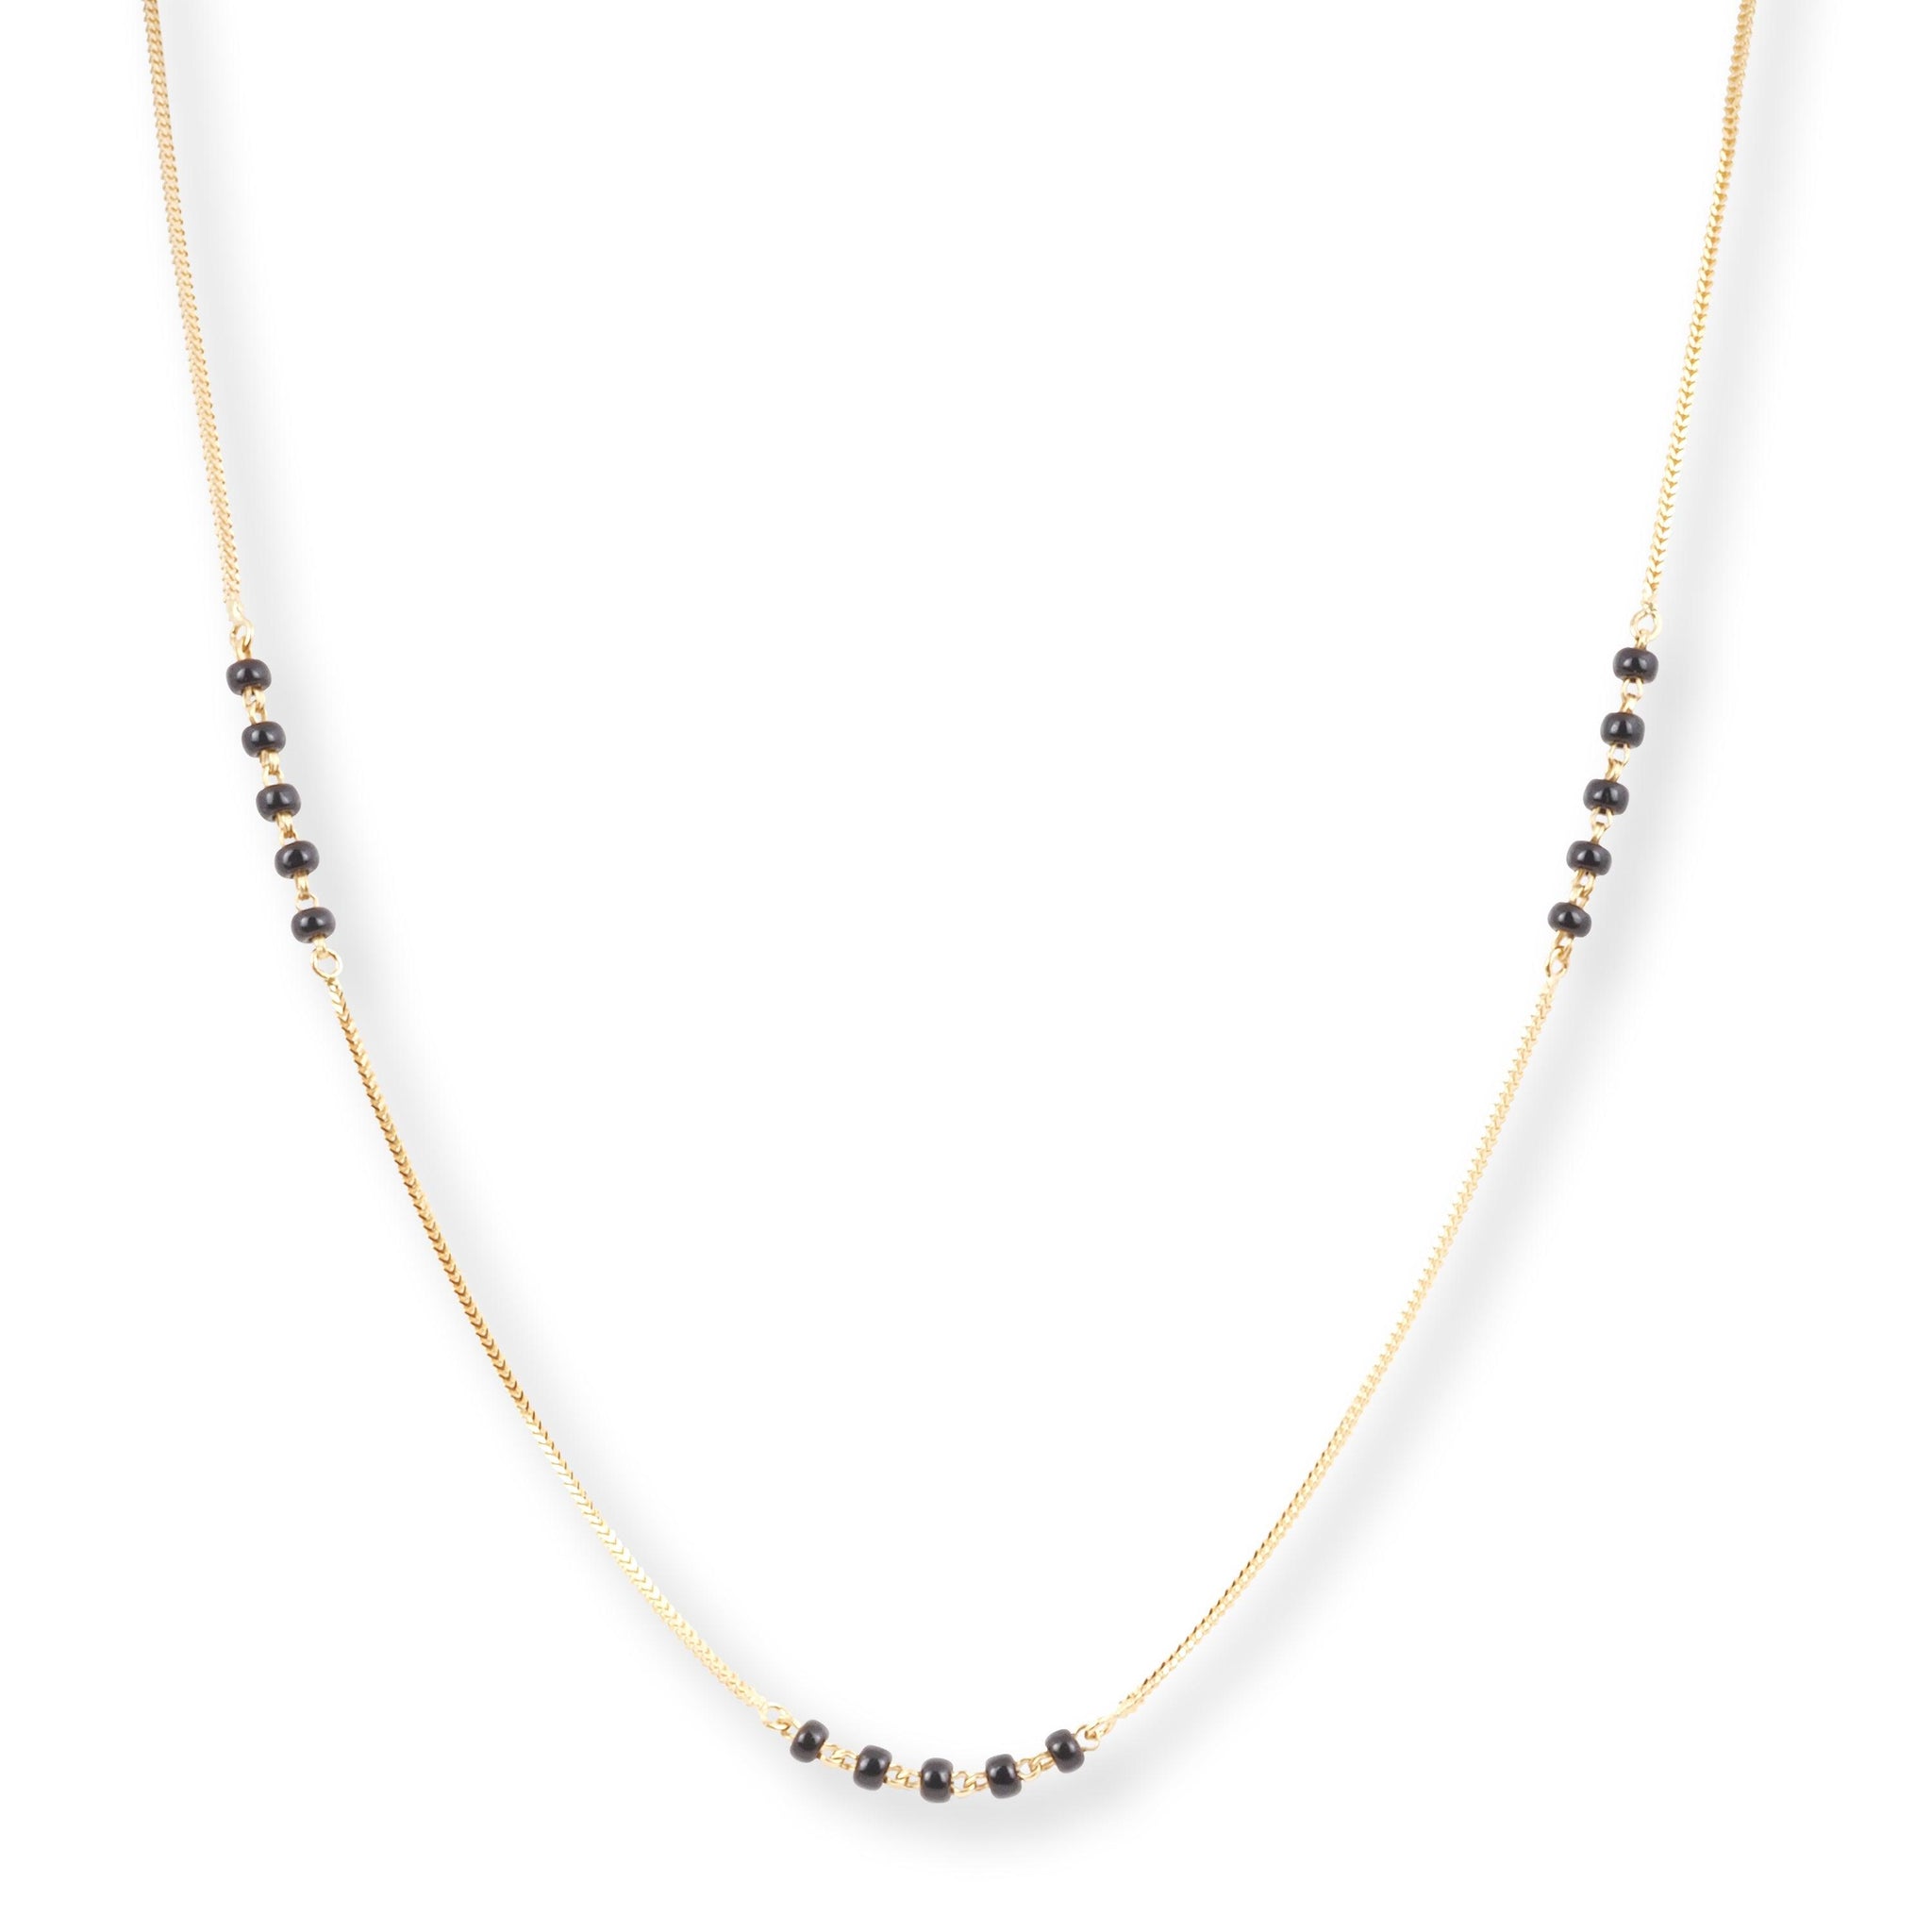 22ct Gold Foxtail Chain with Two Black Beads at Intervals with Bolt Ring Clasp C-3821